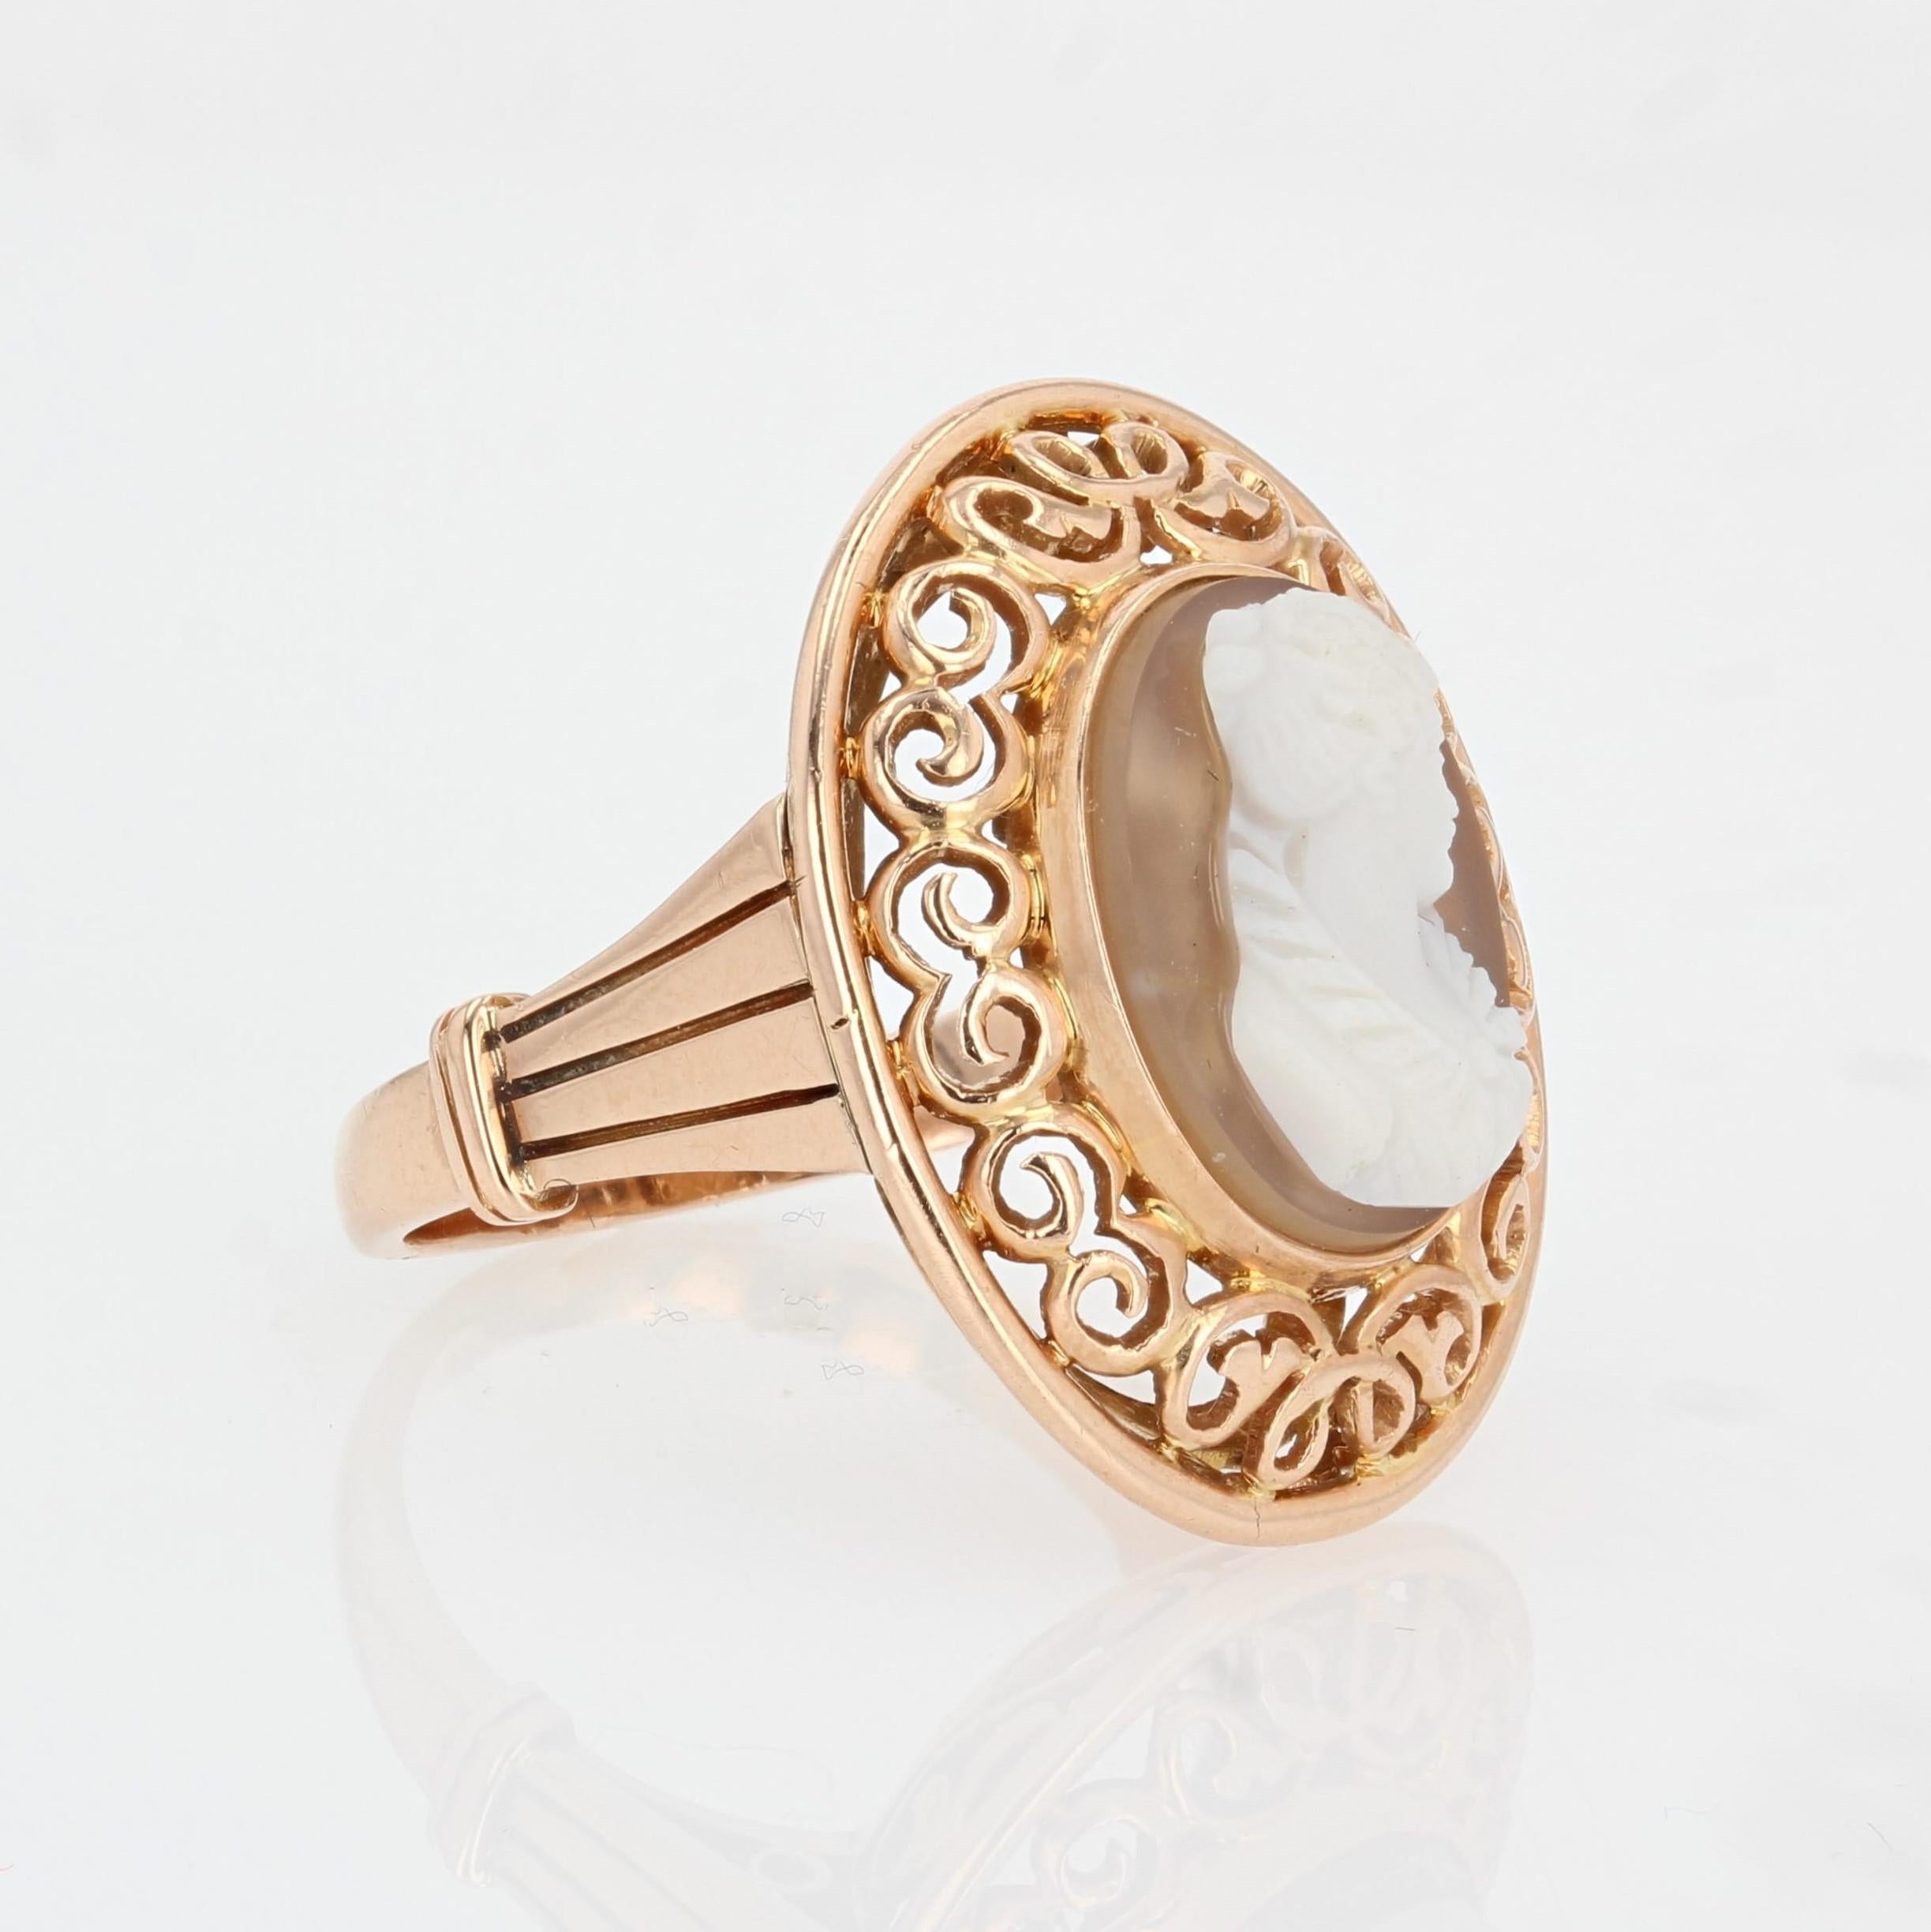 Romantic Early 20th French Antique Gold Agate Cameo Ring For Sale